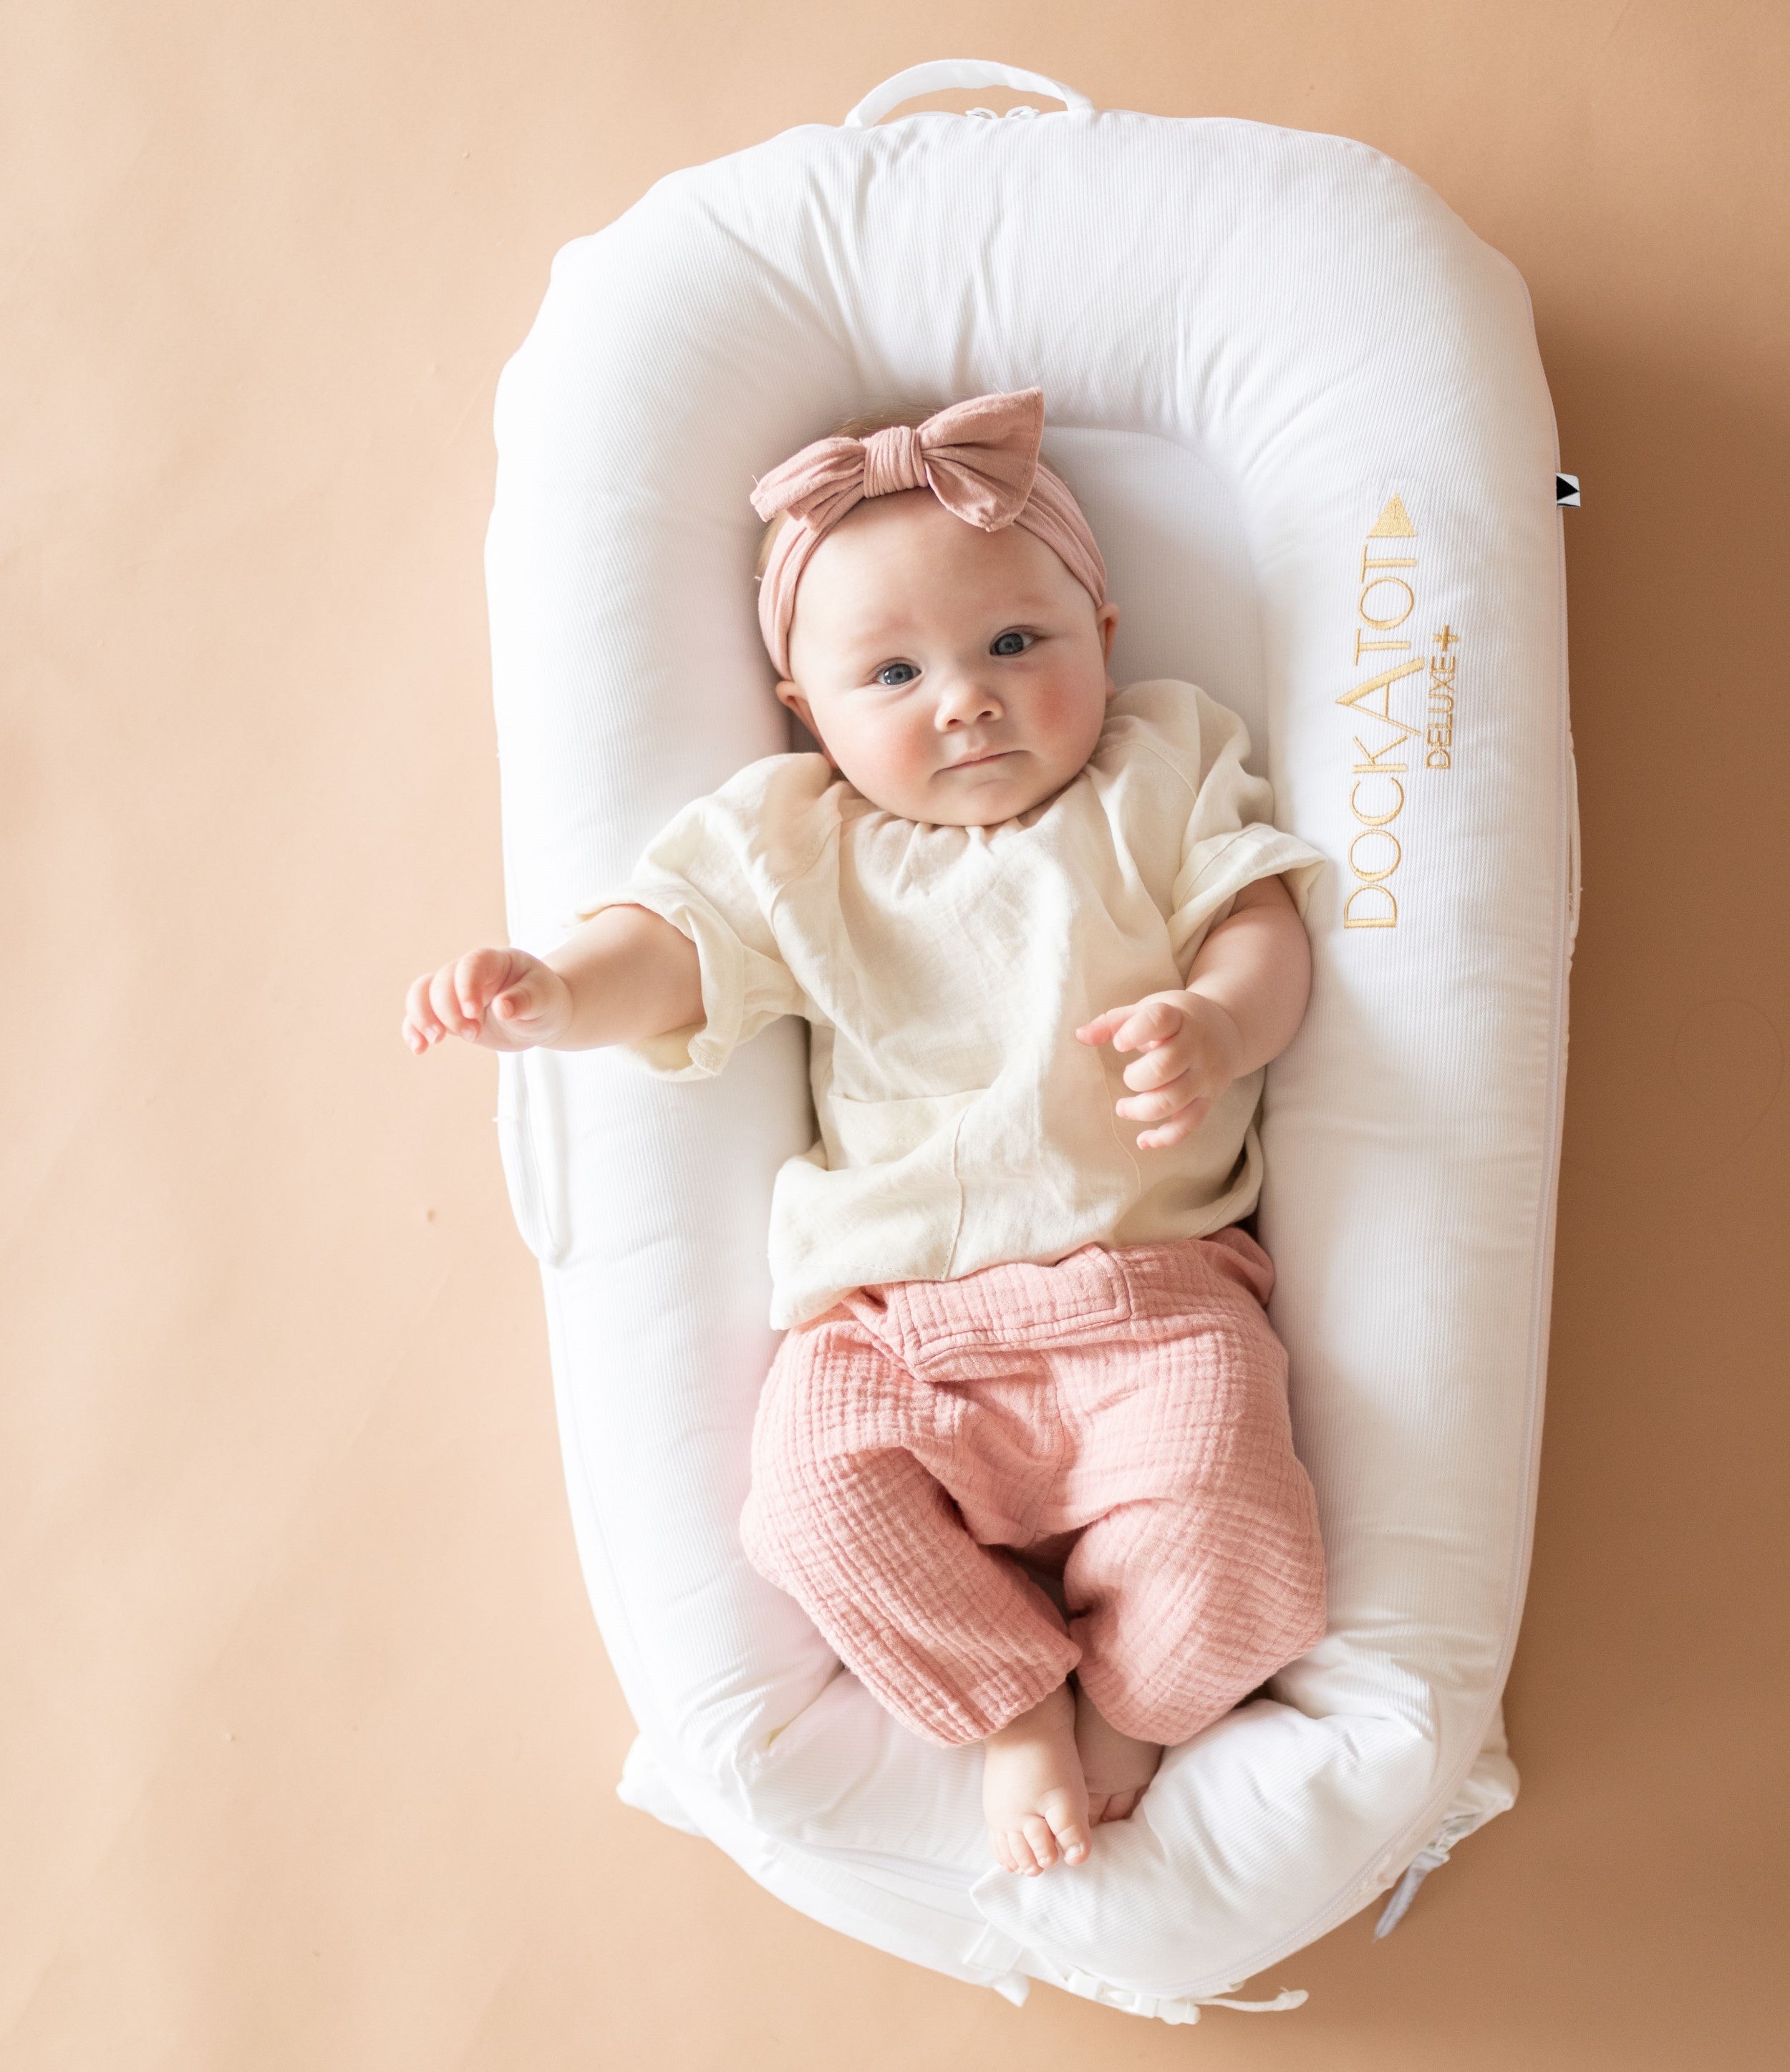 Why Use A Baby Lounger? – DockATot EU